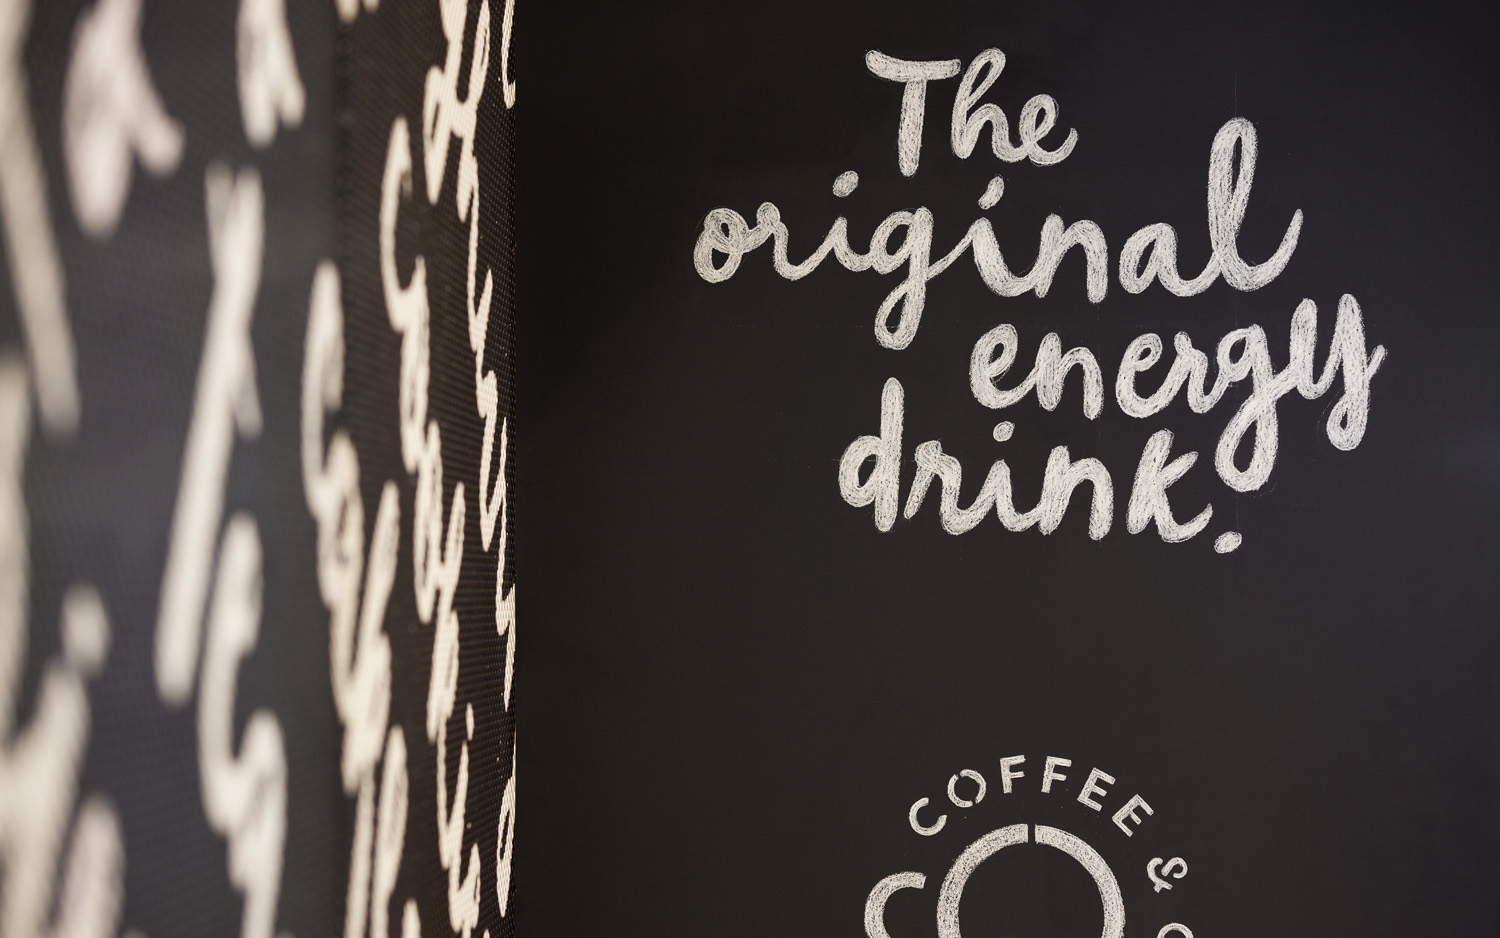 Interior graphics and logo design by Bond for cruise ship cafeteria concept Coffee & Co.